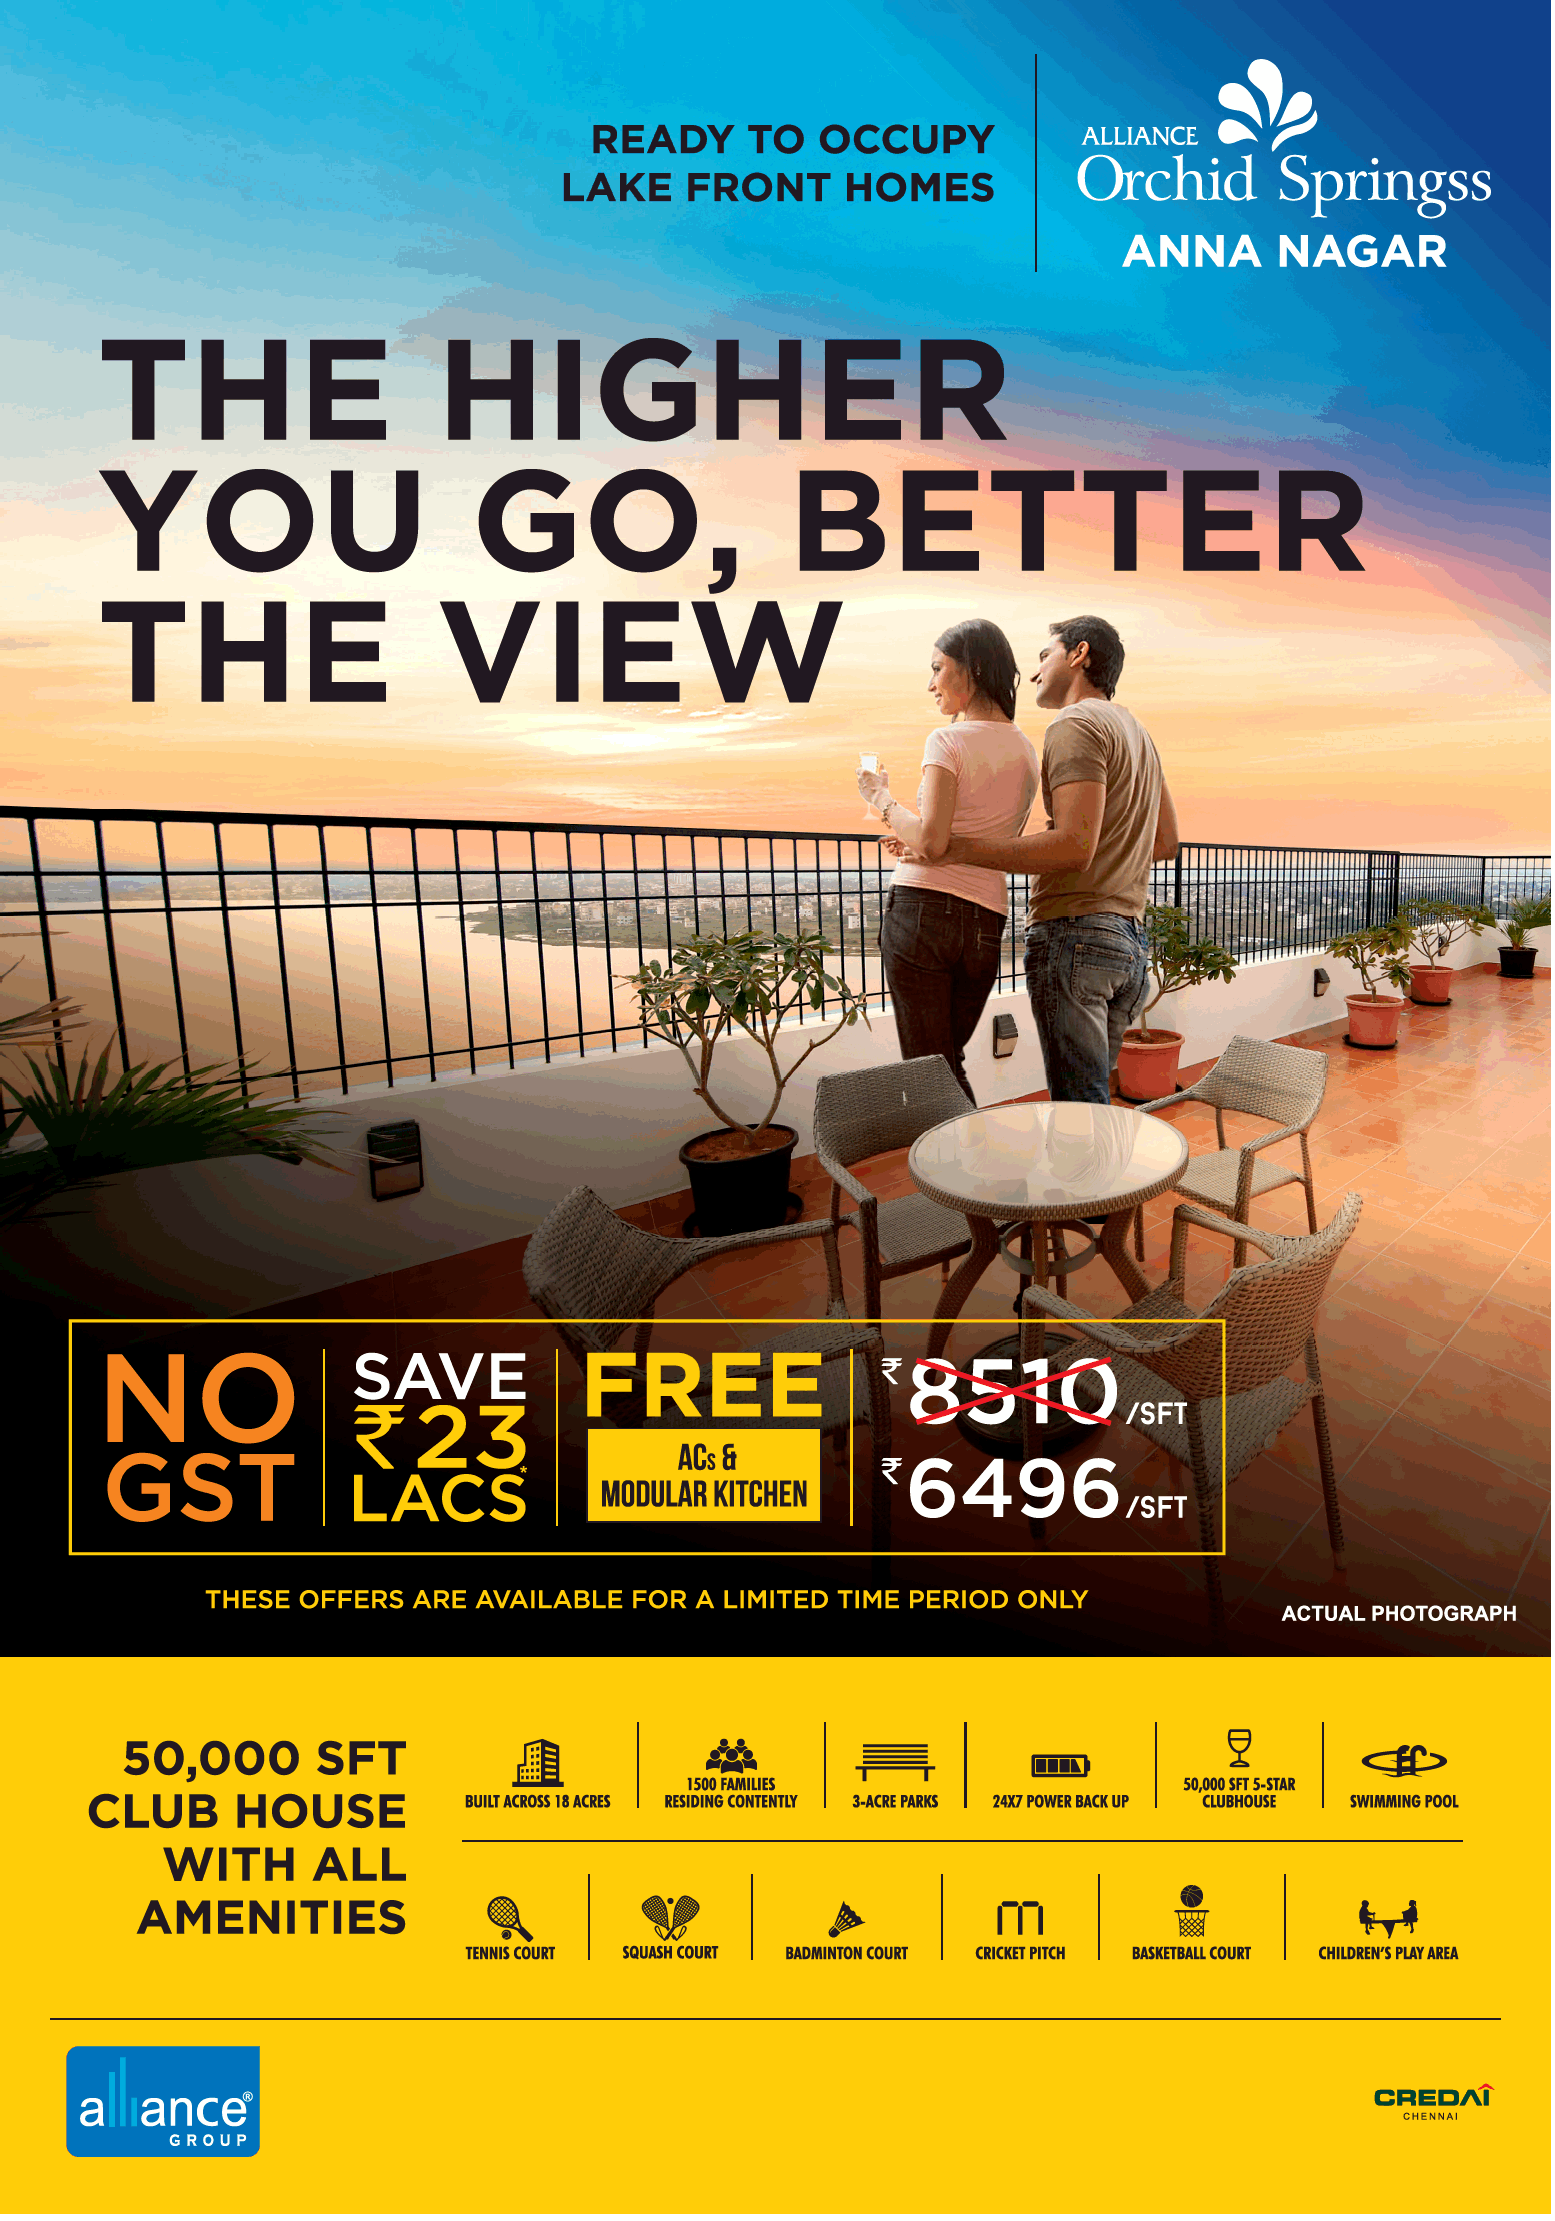 Pay No GST & Save upto Rs. 23 Lakhs at Alliance Orchid Springss in Chennai